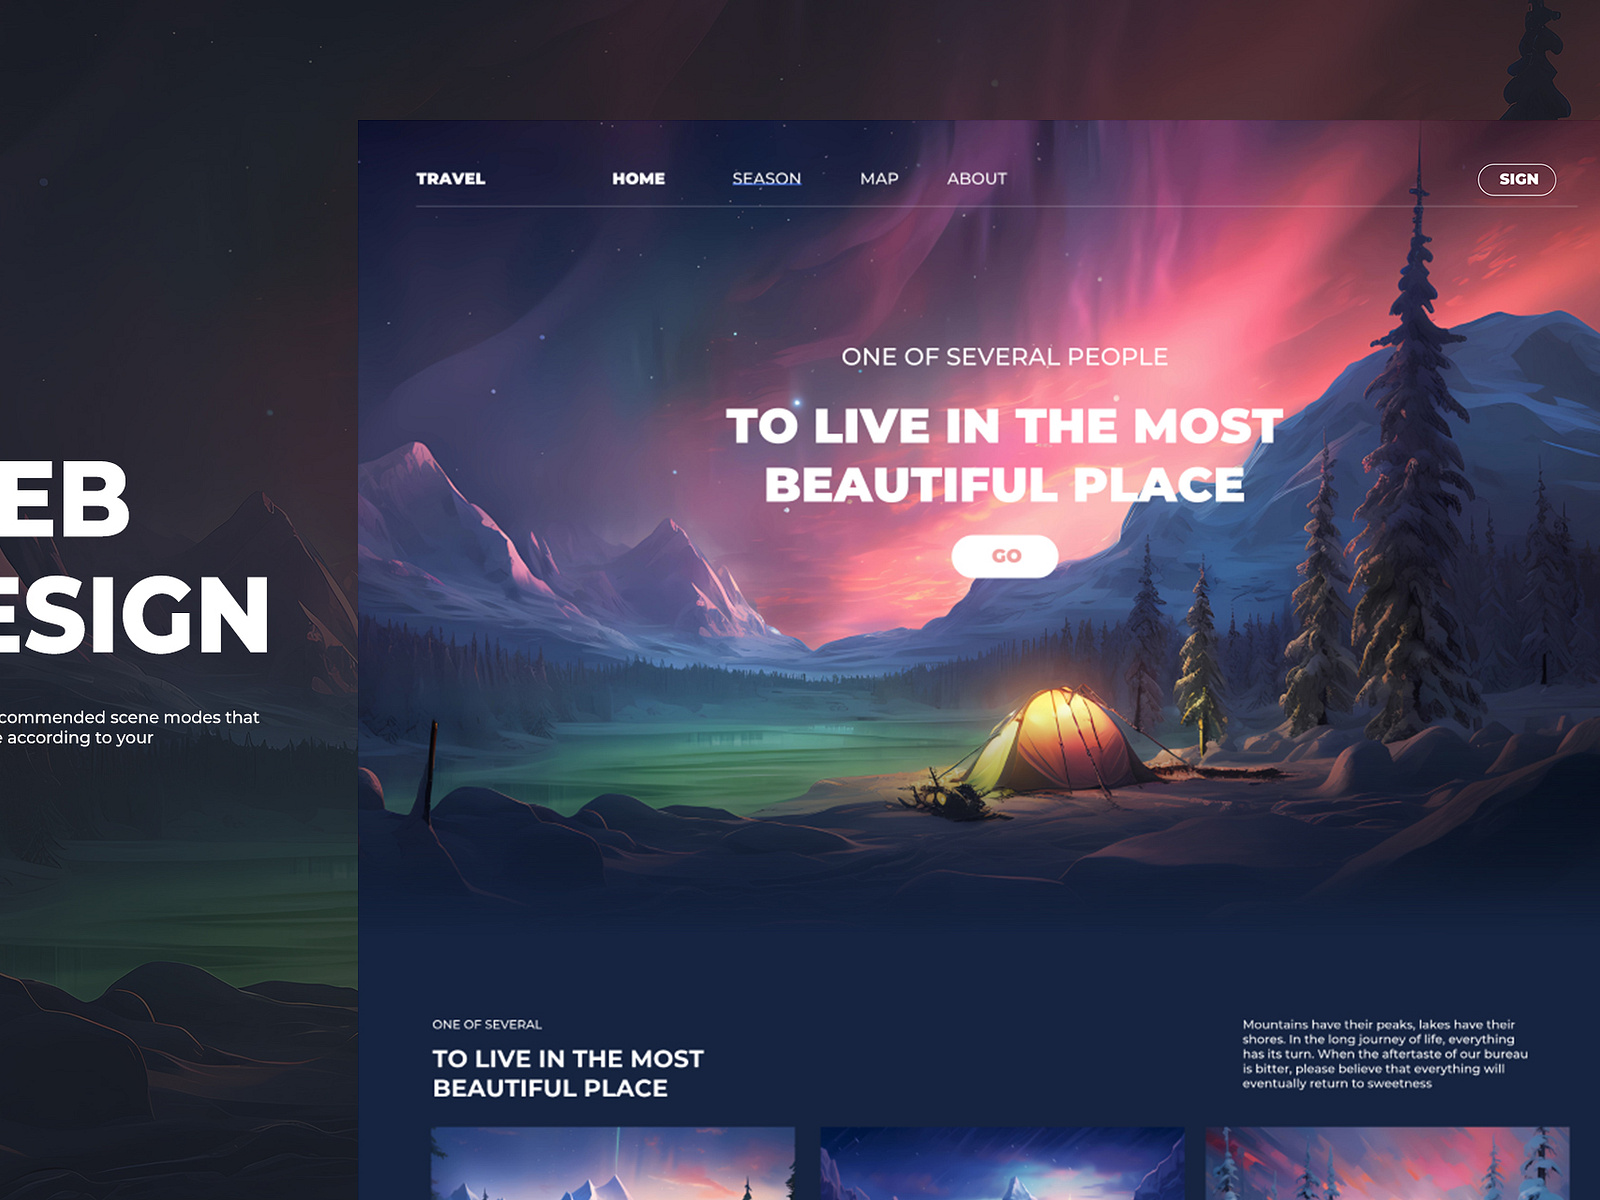 Camping to see the aurora by 逗逗爱洗澡 on Dribbble